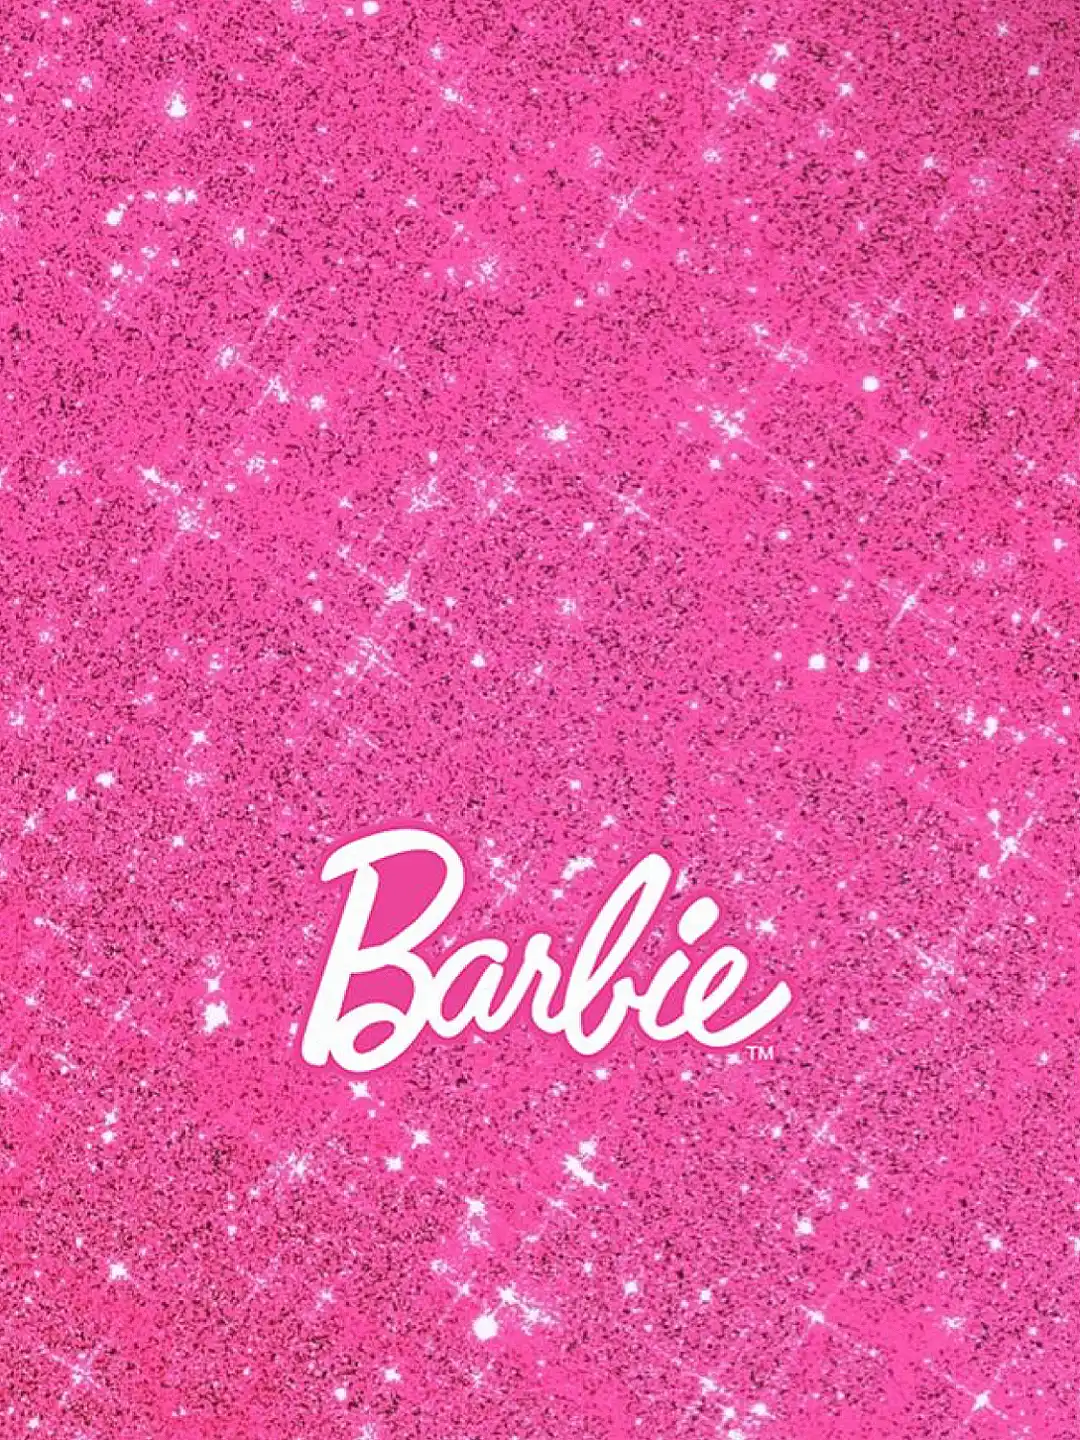 Barbie wallpaper. Do not mention downloads or free downloads - Barbie